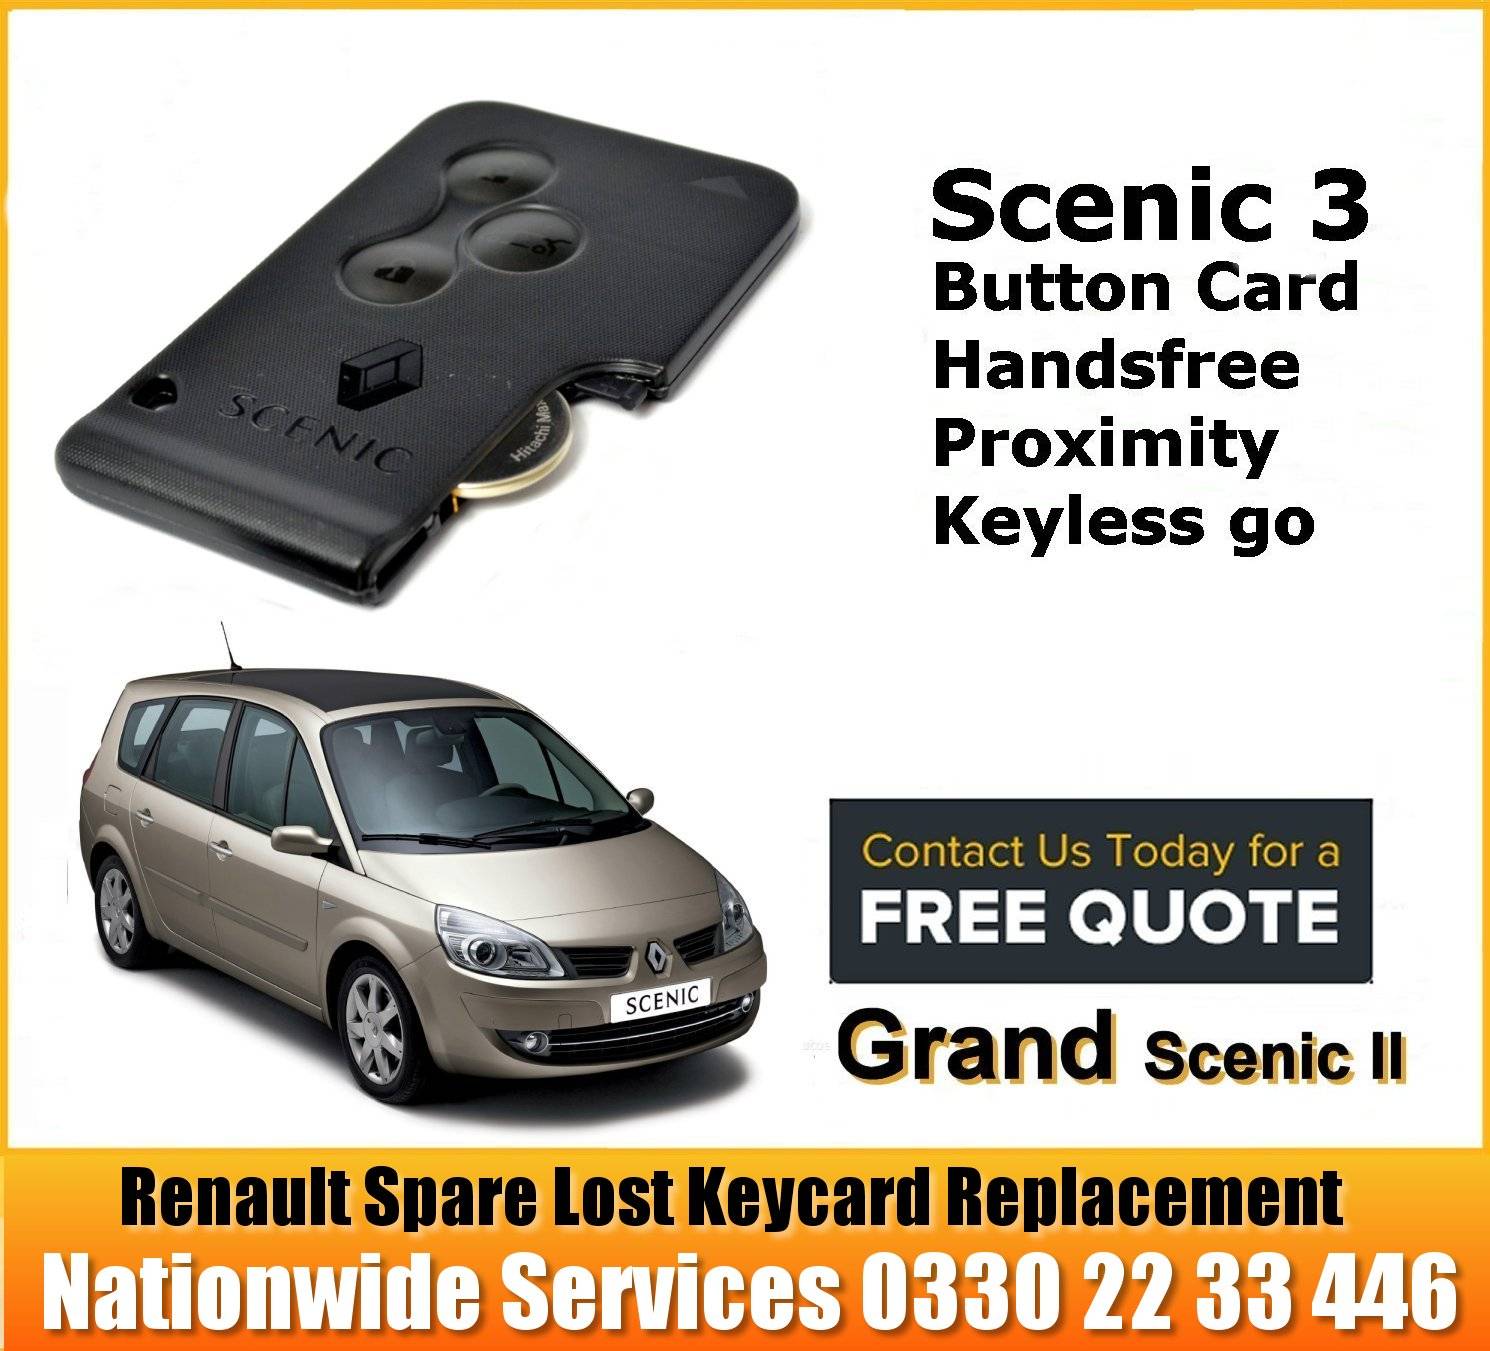 Renault Grand Scenic 2003 - 2008 programming repair services manchester replacement keycards